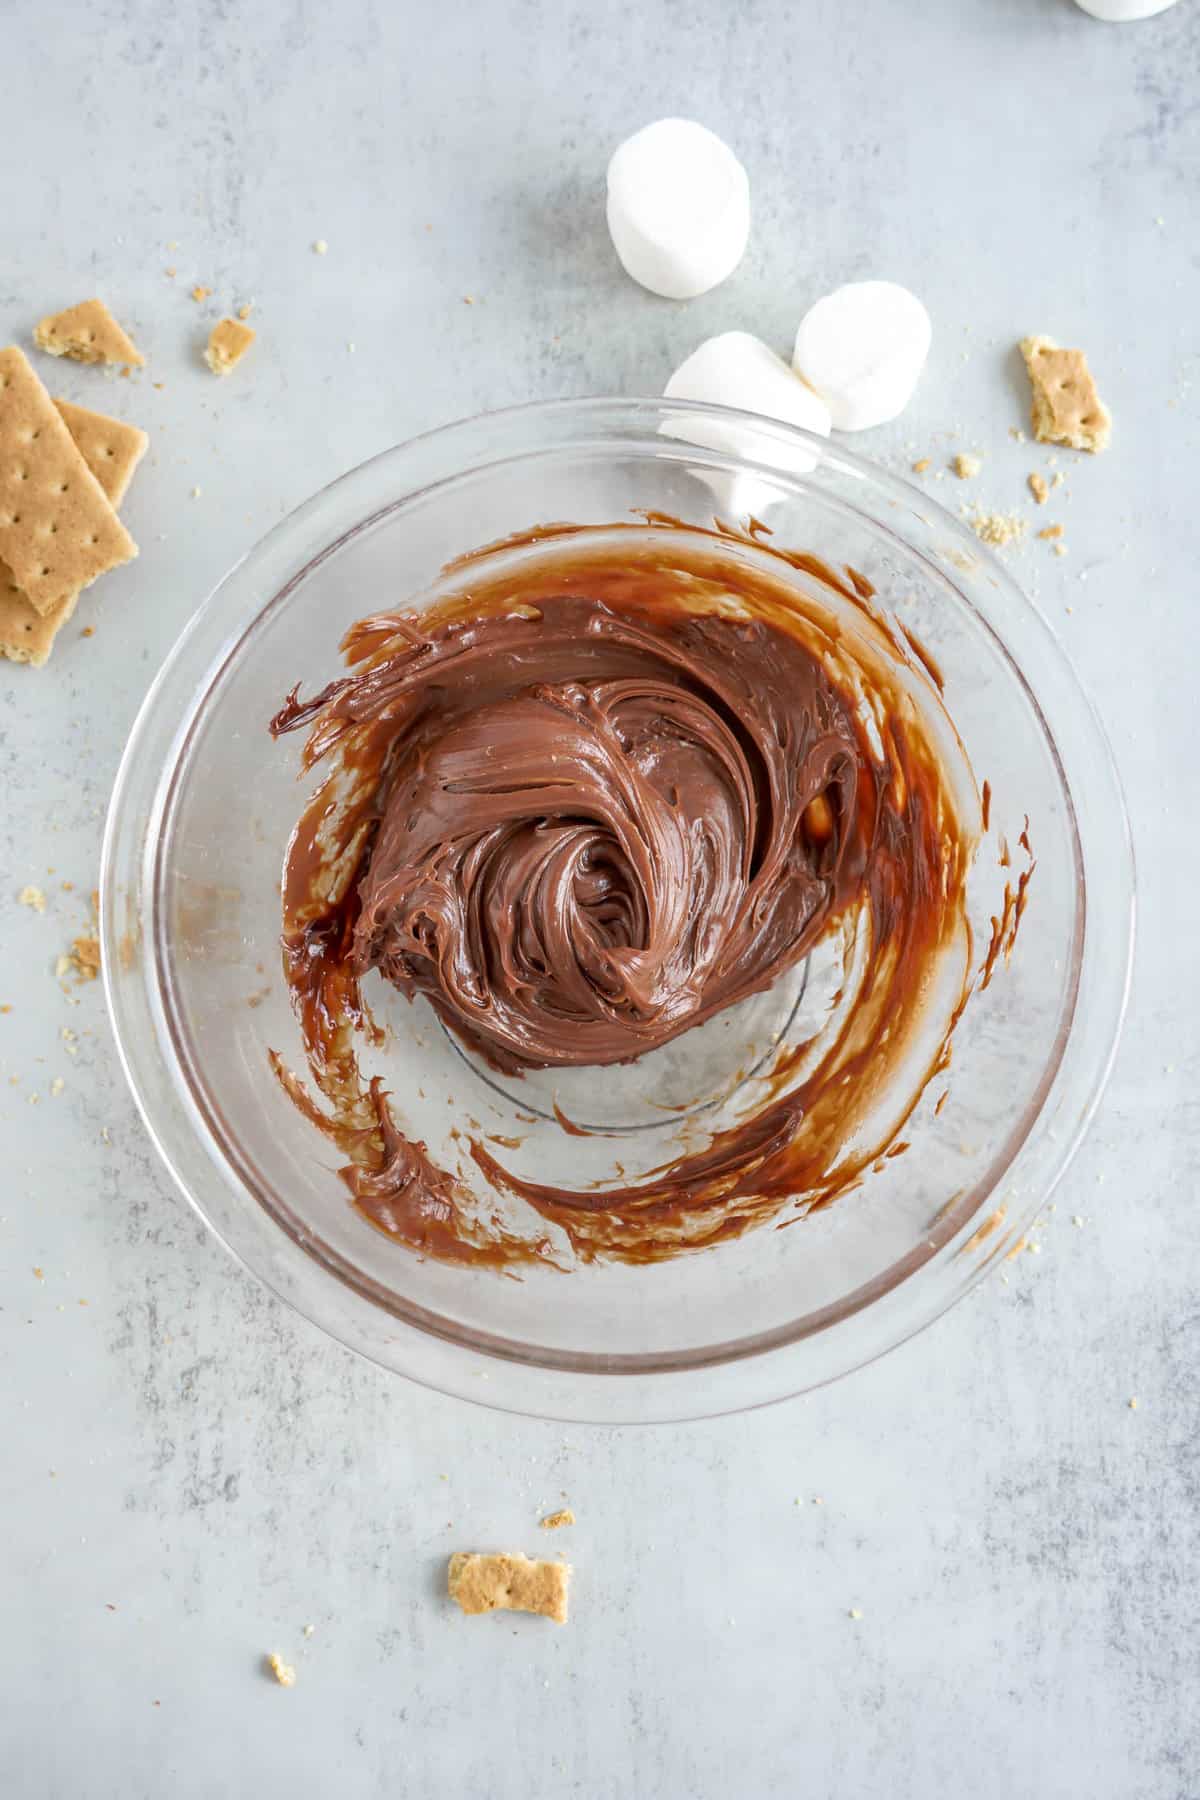 S mores Dip Recipe with Blended Chocolate, Fudge, and Cream Cheese